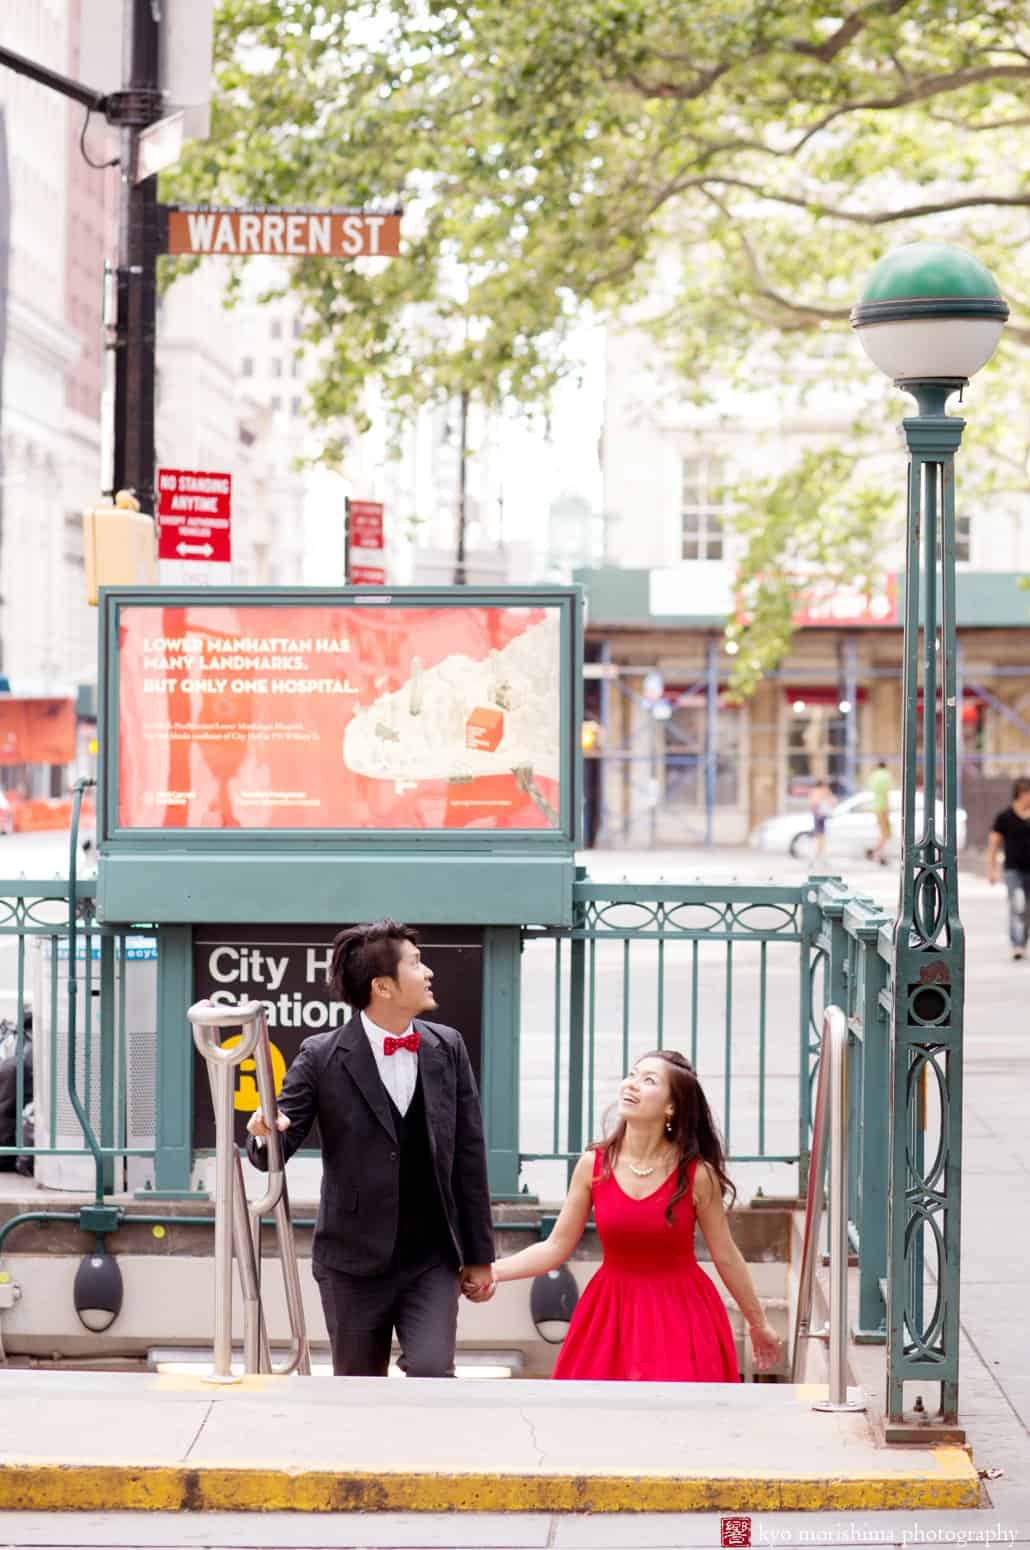 Arriving at City Hall Station for engagement photo session in downtown NYC, photographed by Kyo Morishima